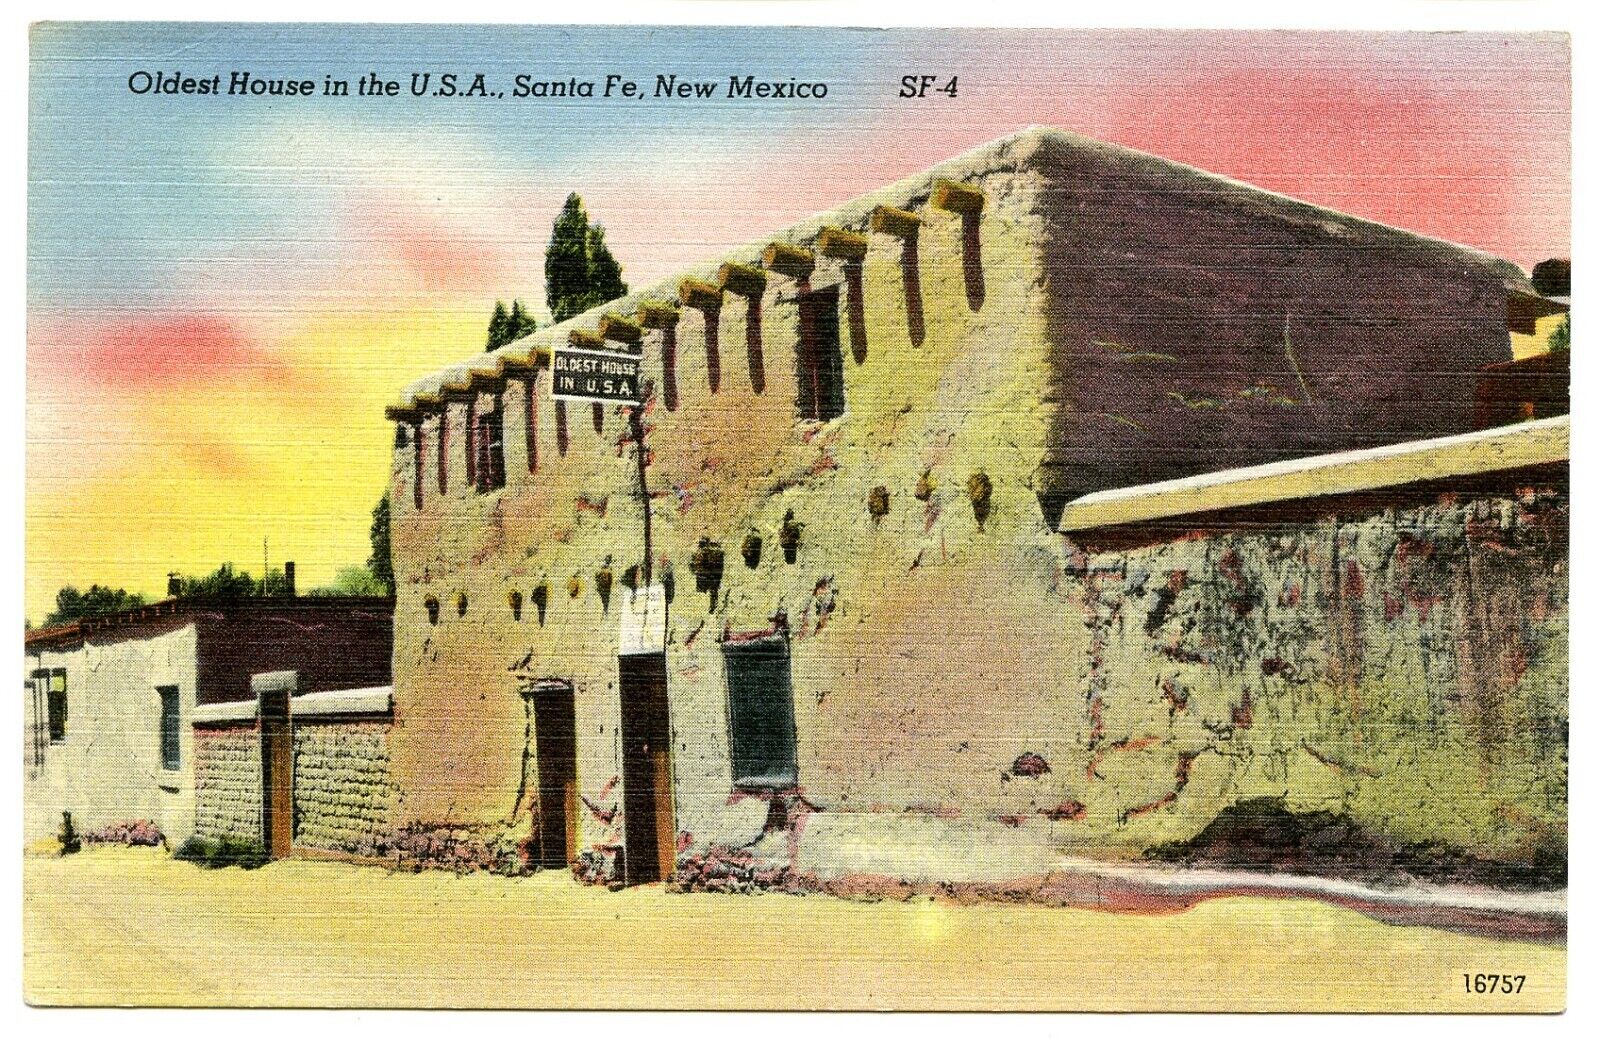 Santa Fe New Mexico NM - Oldest House in the USA Vintage Linen Postcard